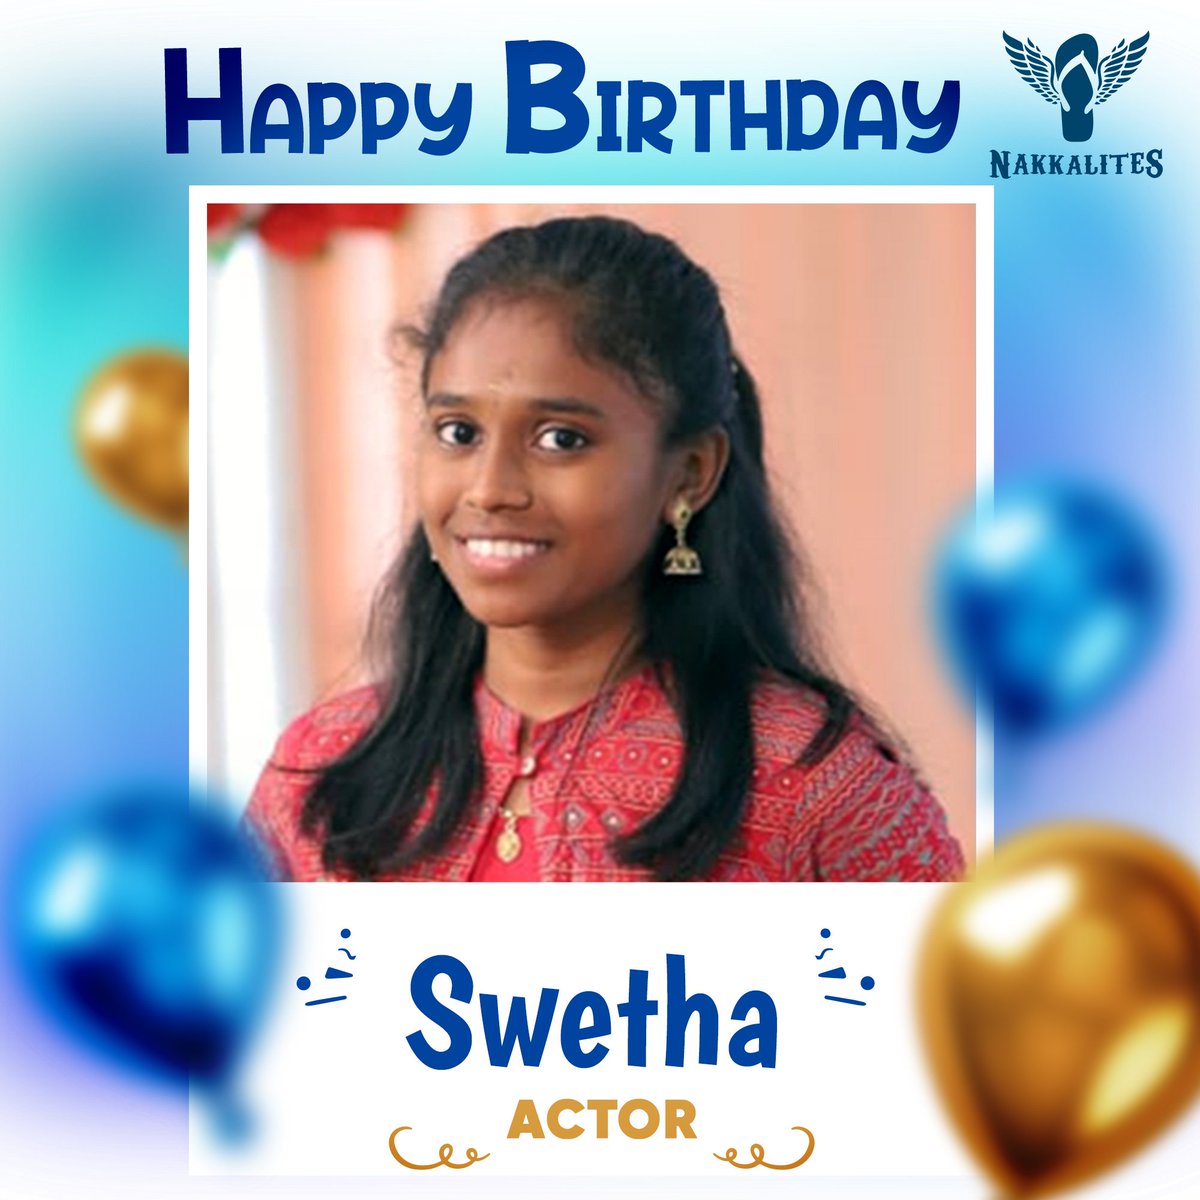 On your birthday may you be enriched in light, love, and hope for a prosperous year ahead. Happy Birthday Swetha ! #happybirthday #birthday #BirthdayBash #nakkalites_family💙